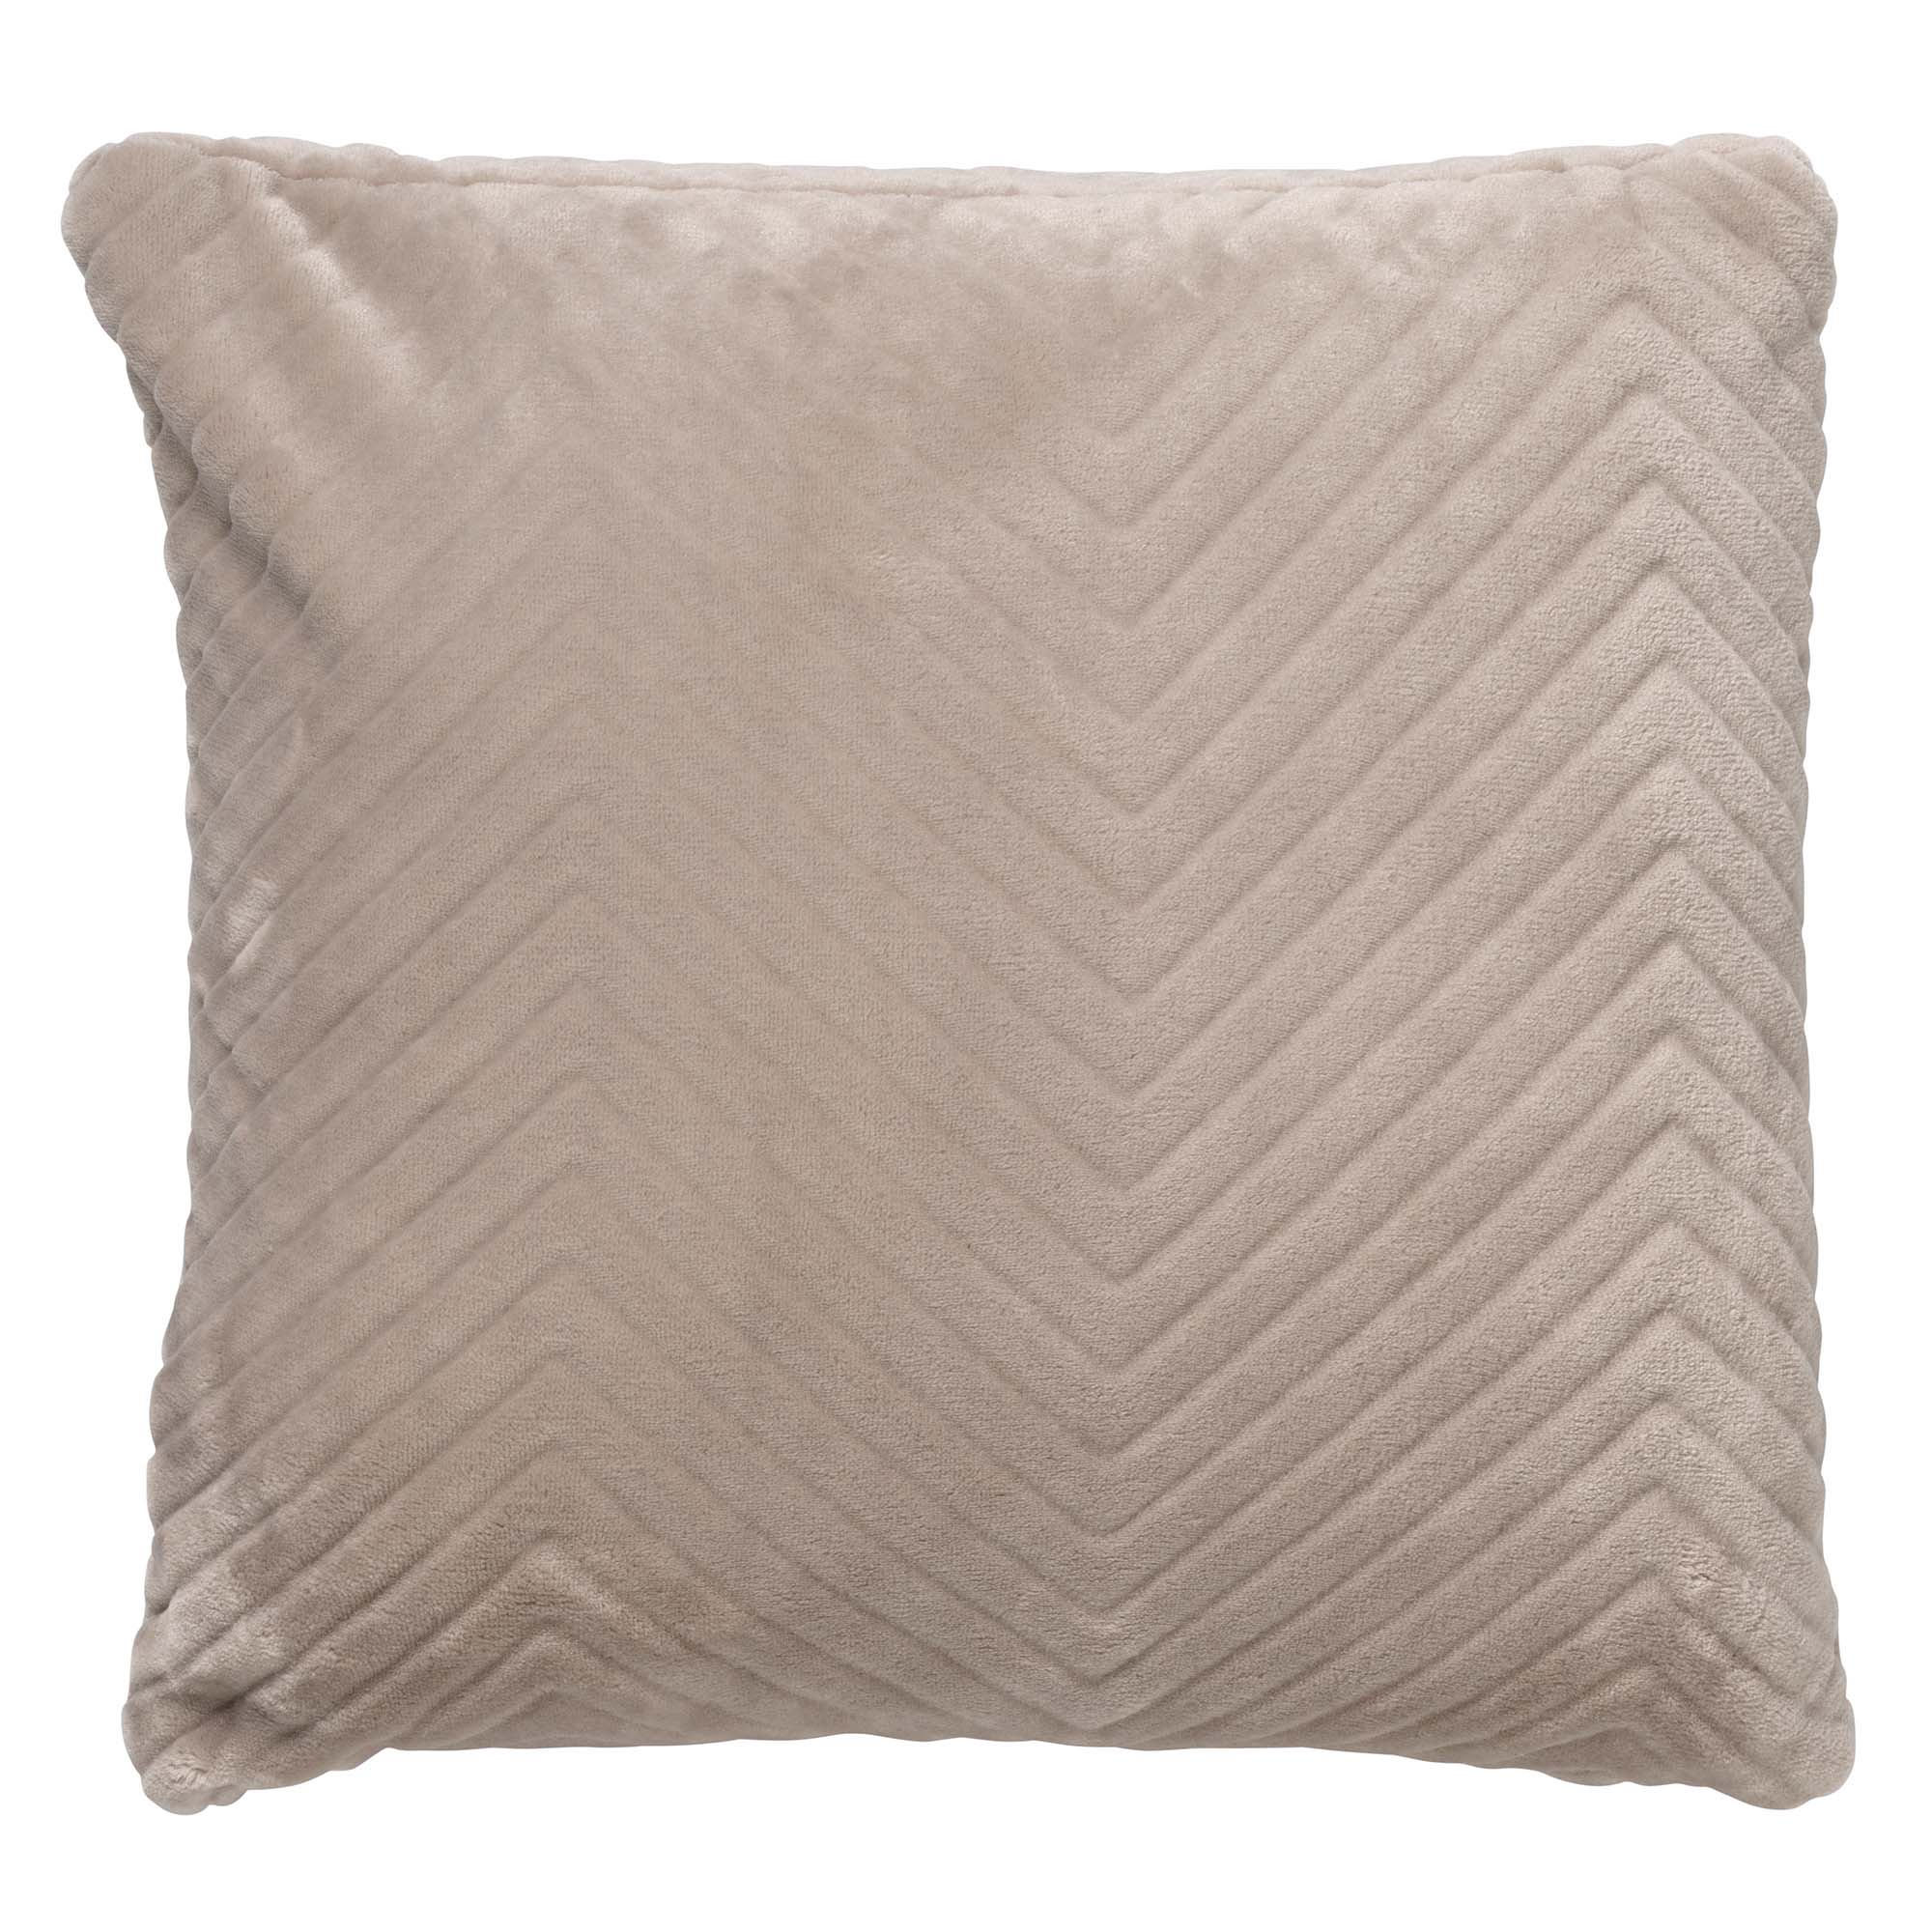 ZICO - Cushion cover with pattern 45x45 cm Pumice Stone